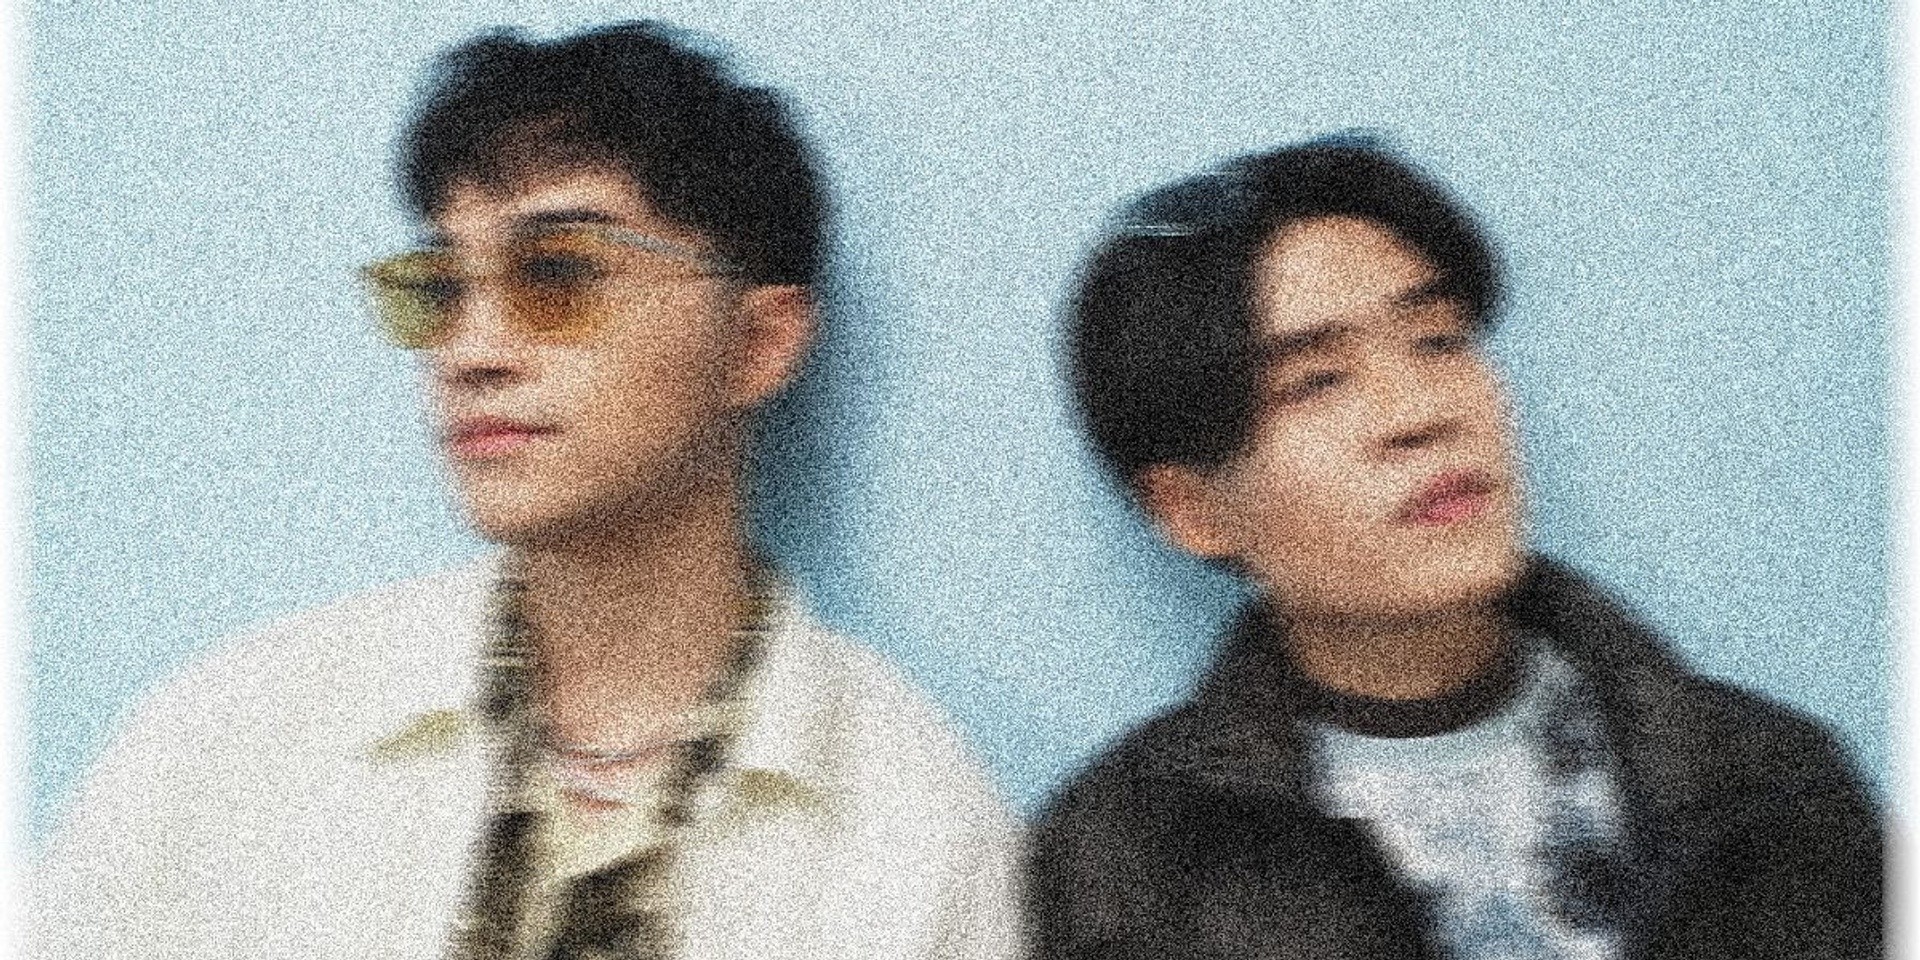 Gentle Bones and lullaboy debut duo project 'Bones & The Boy' with new single 'Good In Me'